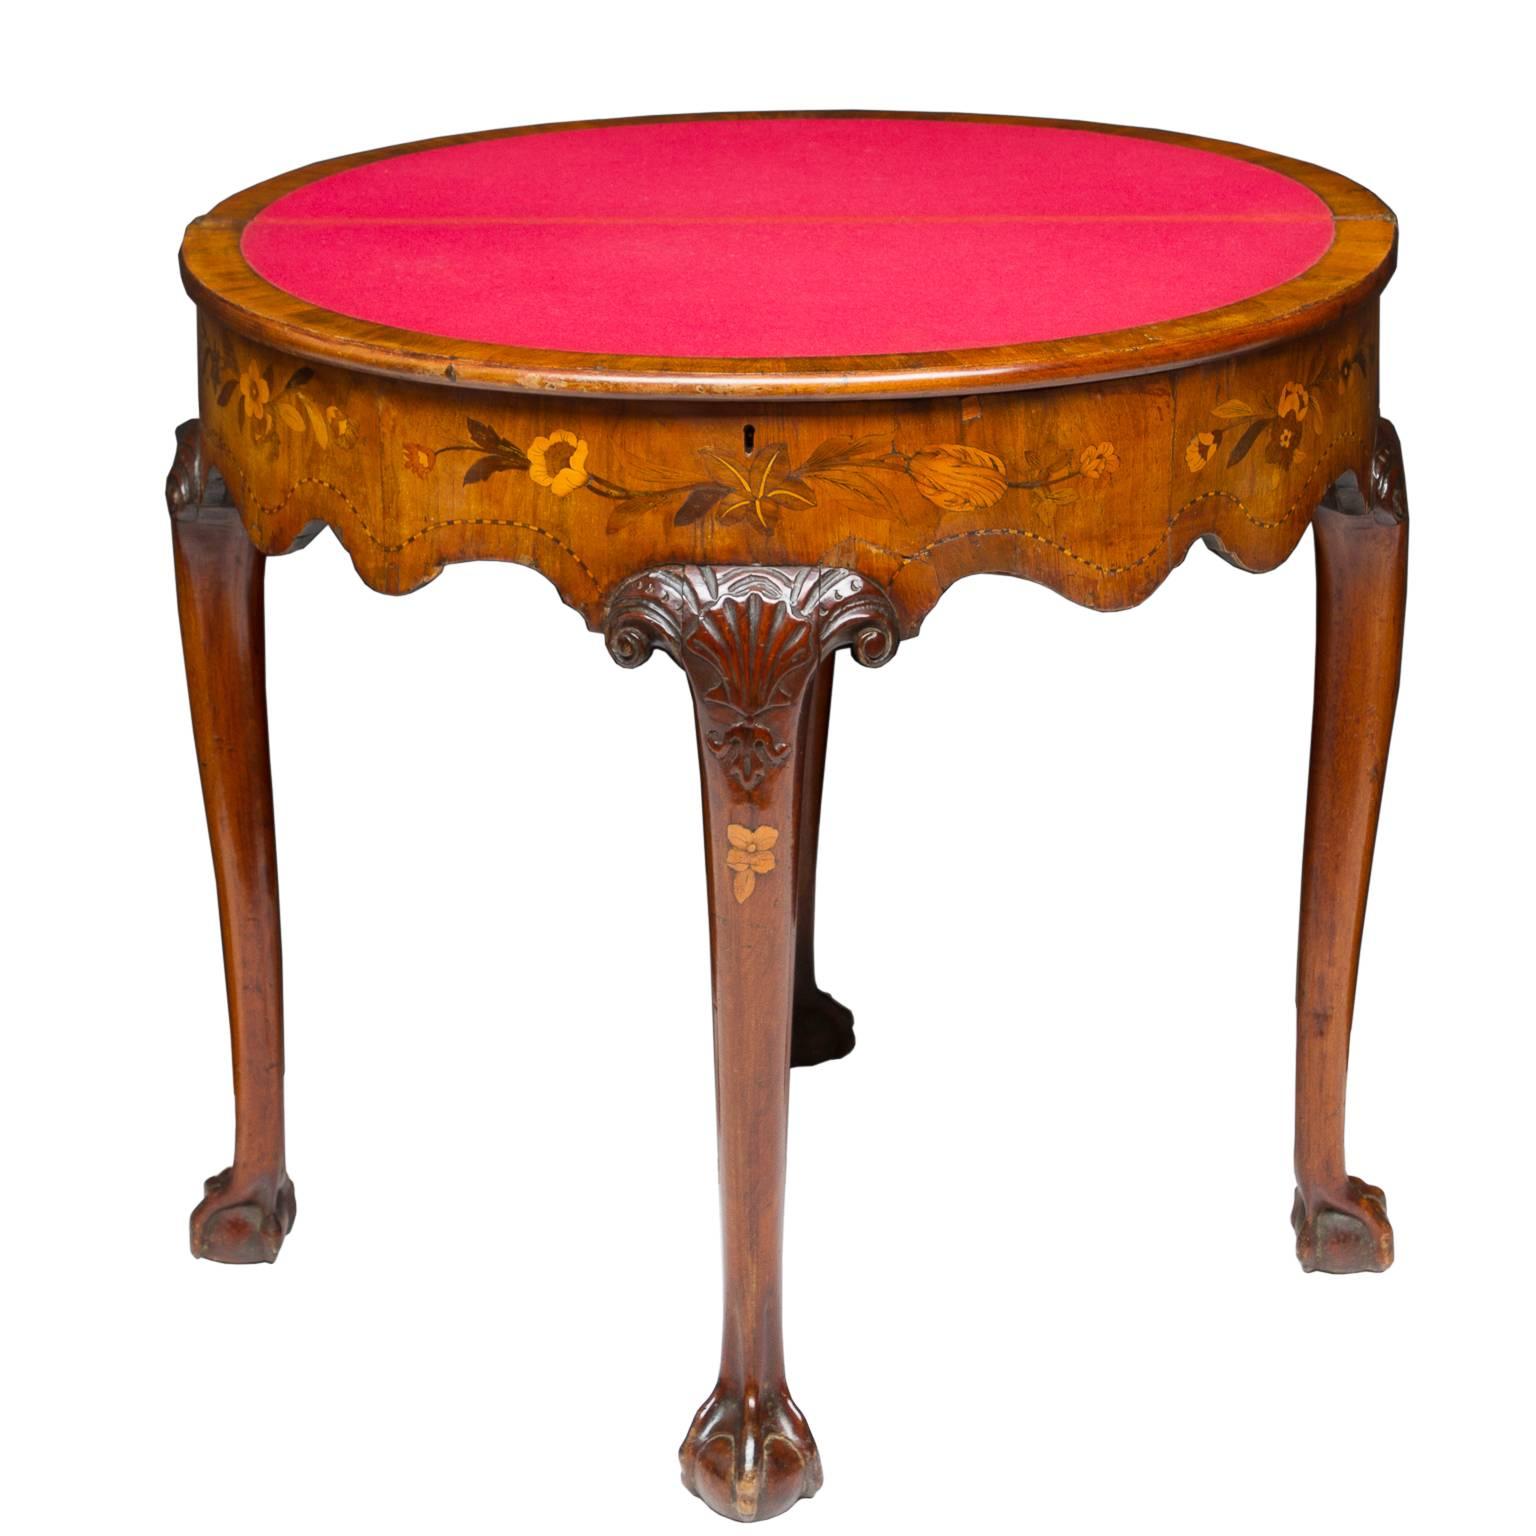 A spectacular and luxurious finished, Dutch marquetry inlaid flip-top game table. This piece is Chippendale style resting on the walnut cabriole legs ending with a claw and ball foot. Notice the shell carvings and the inlay into the leg. Superb!